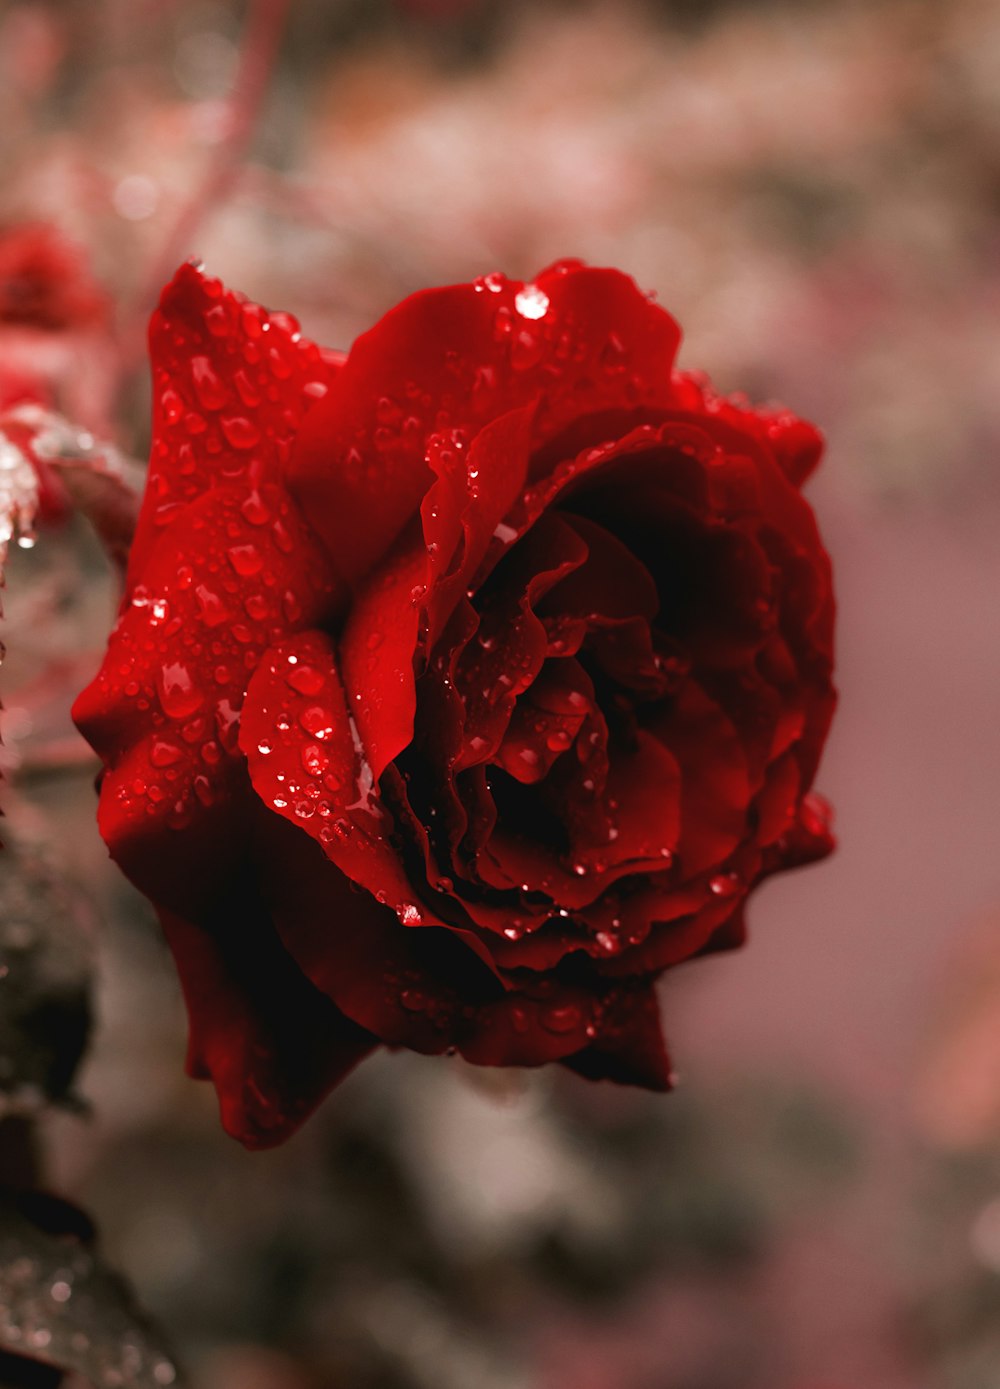 Over 999 Beautiful Rose Flower Images in Stunning 4K Resolution